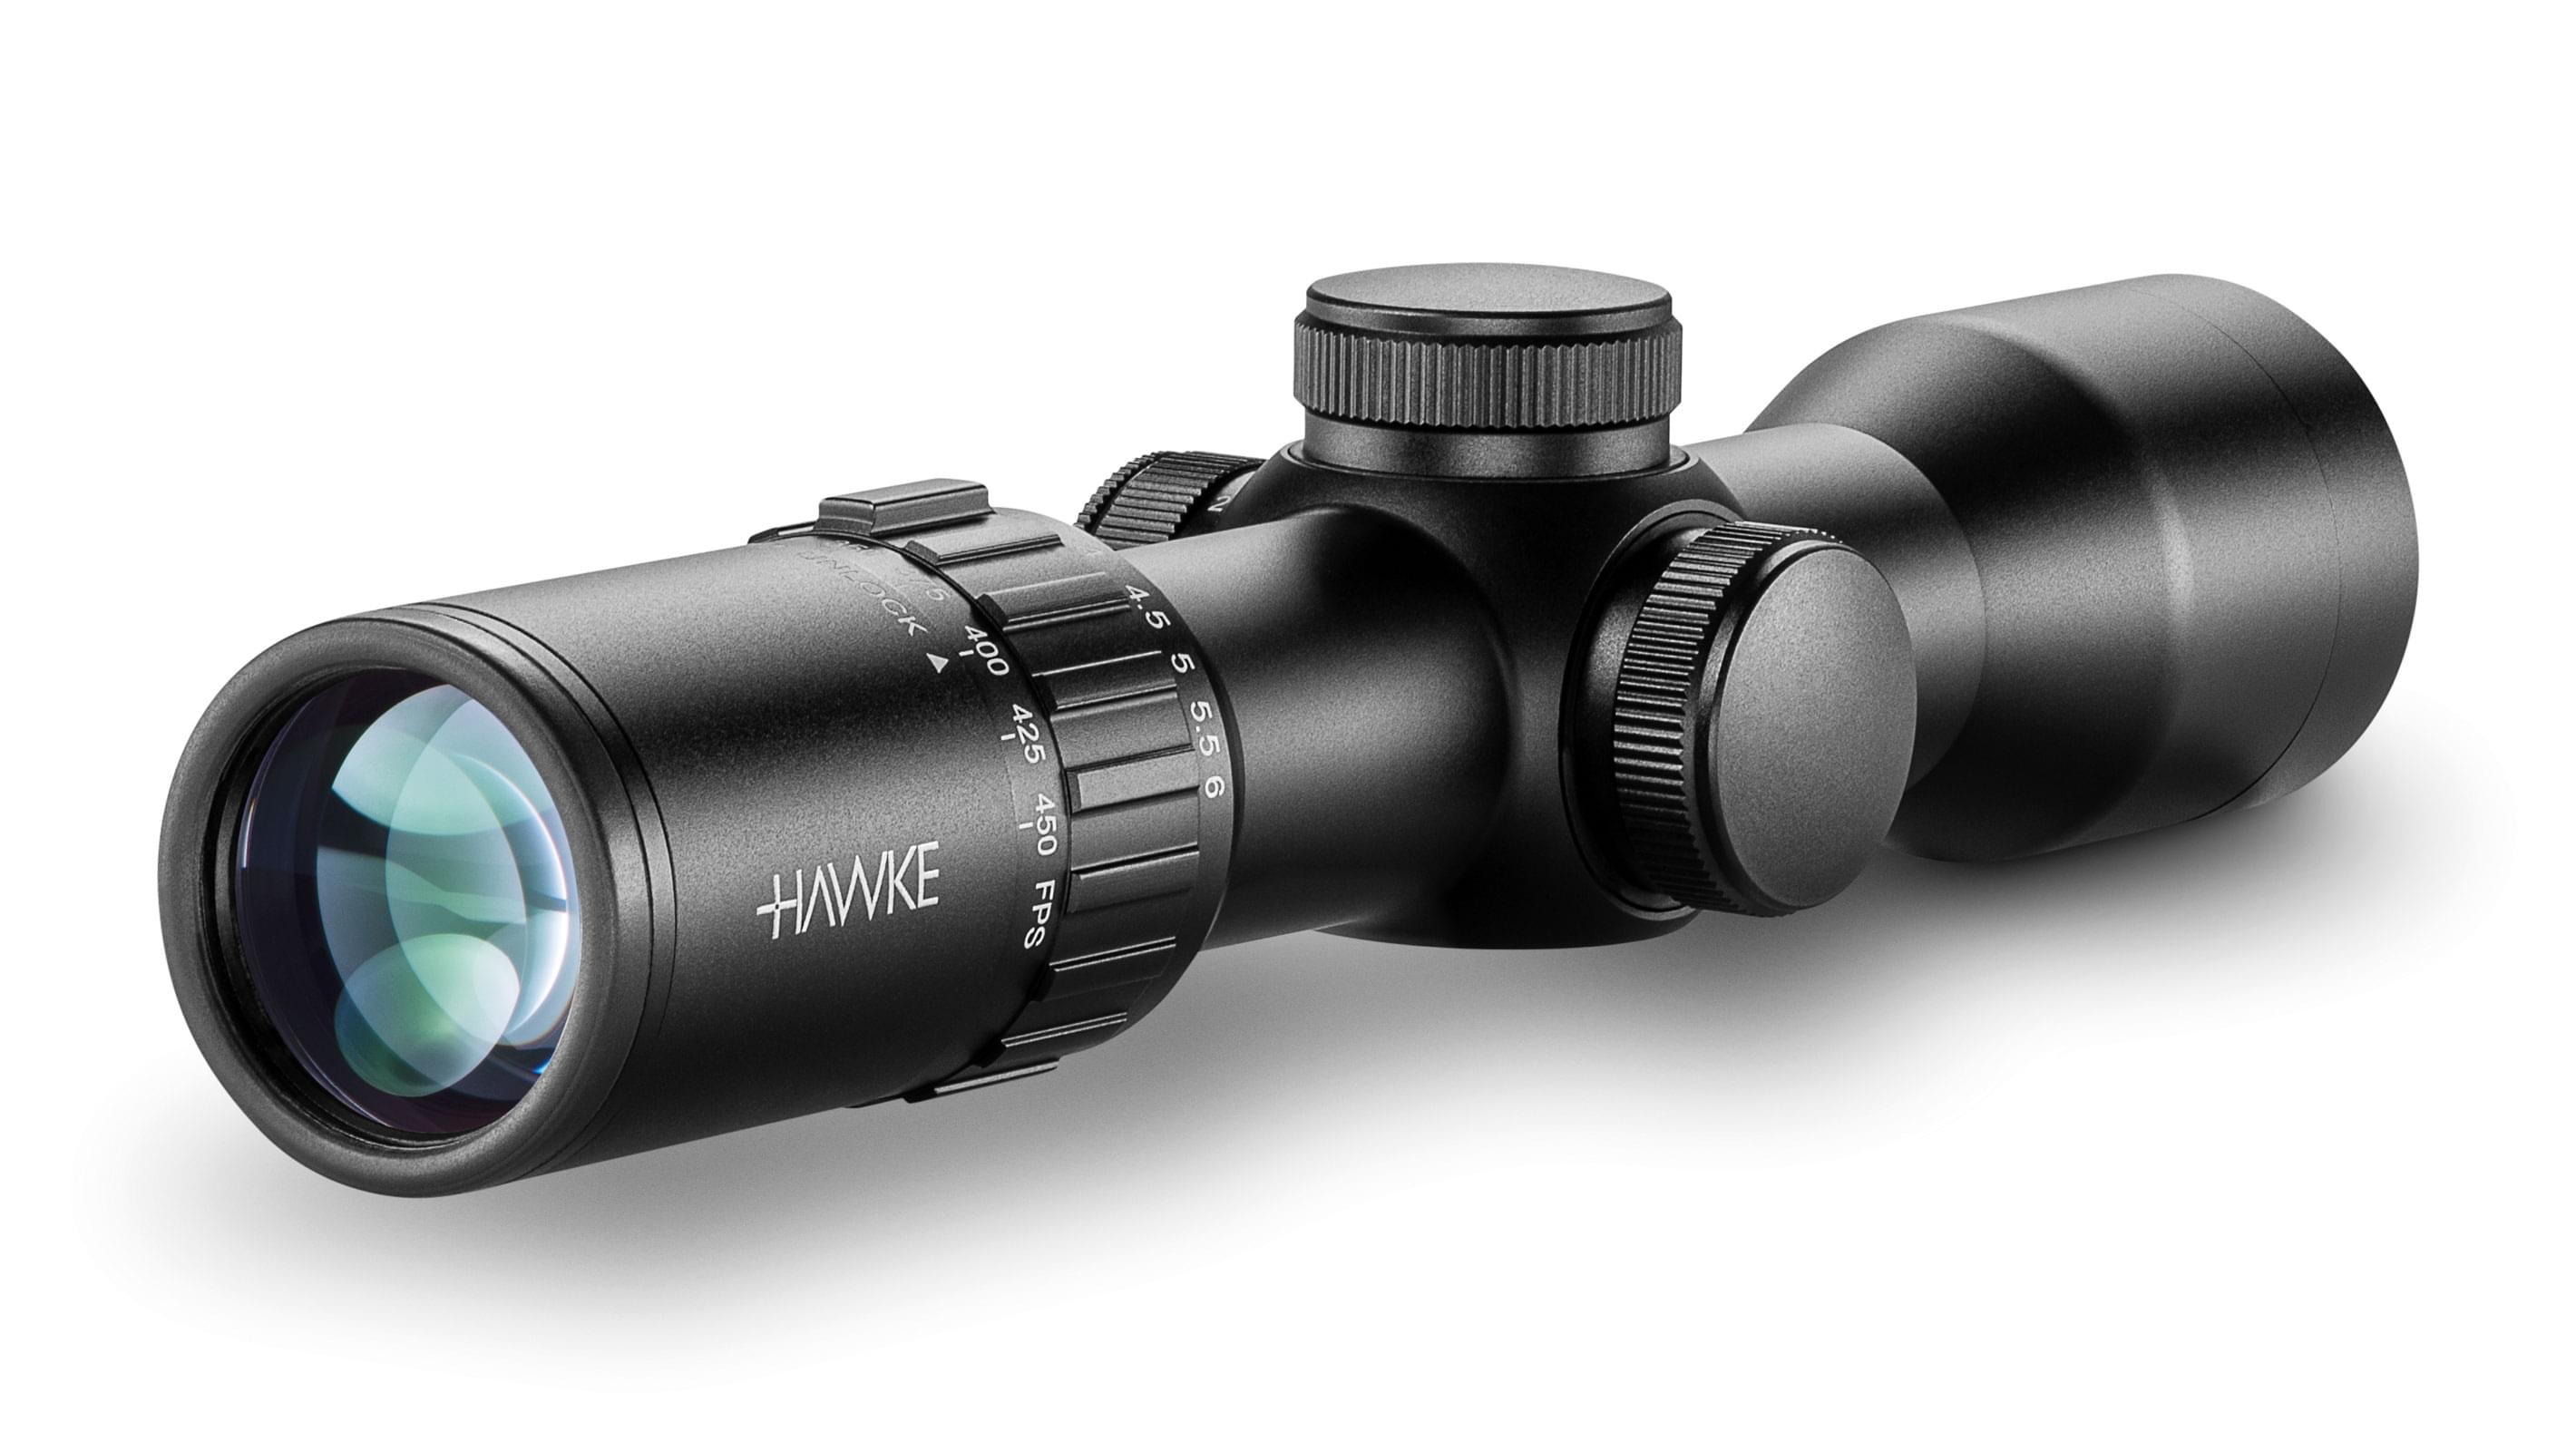 Ocular End View Of The Hawke XB30 Compact 1.5-6x36 SR Scope